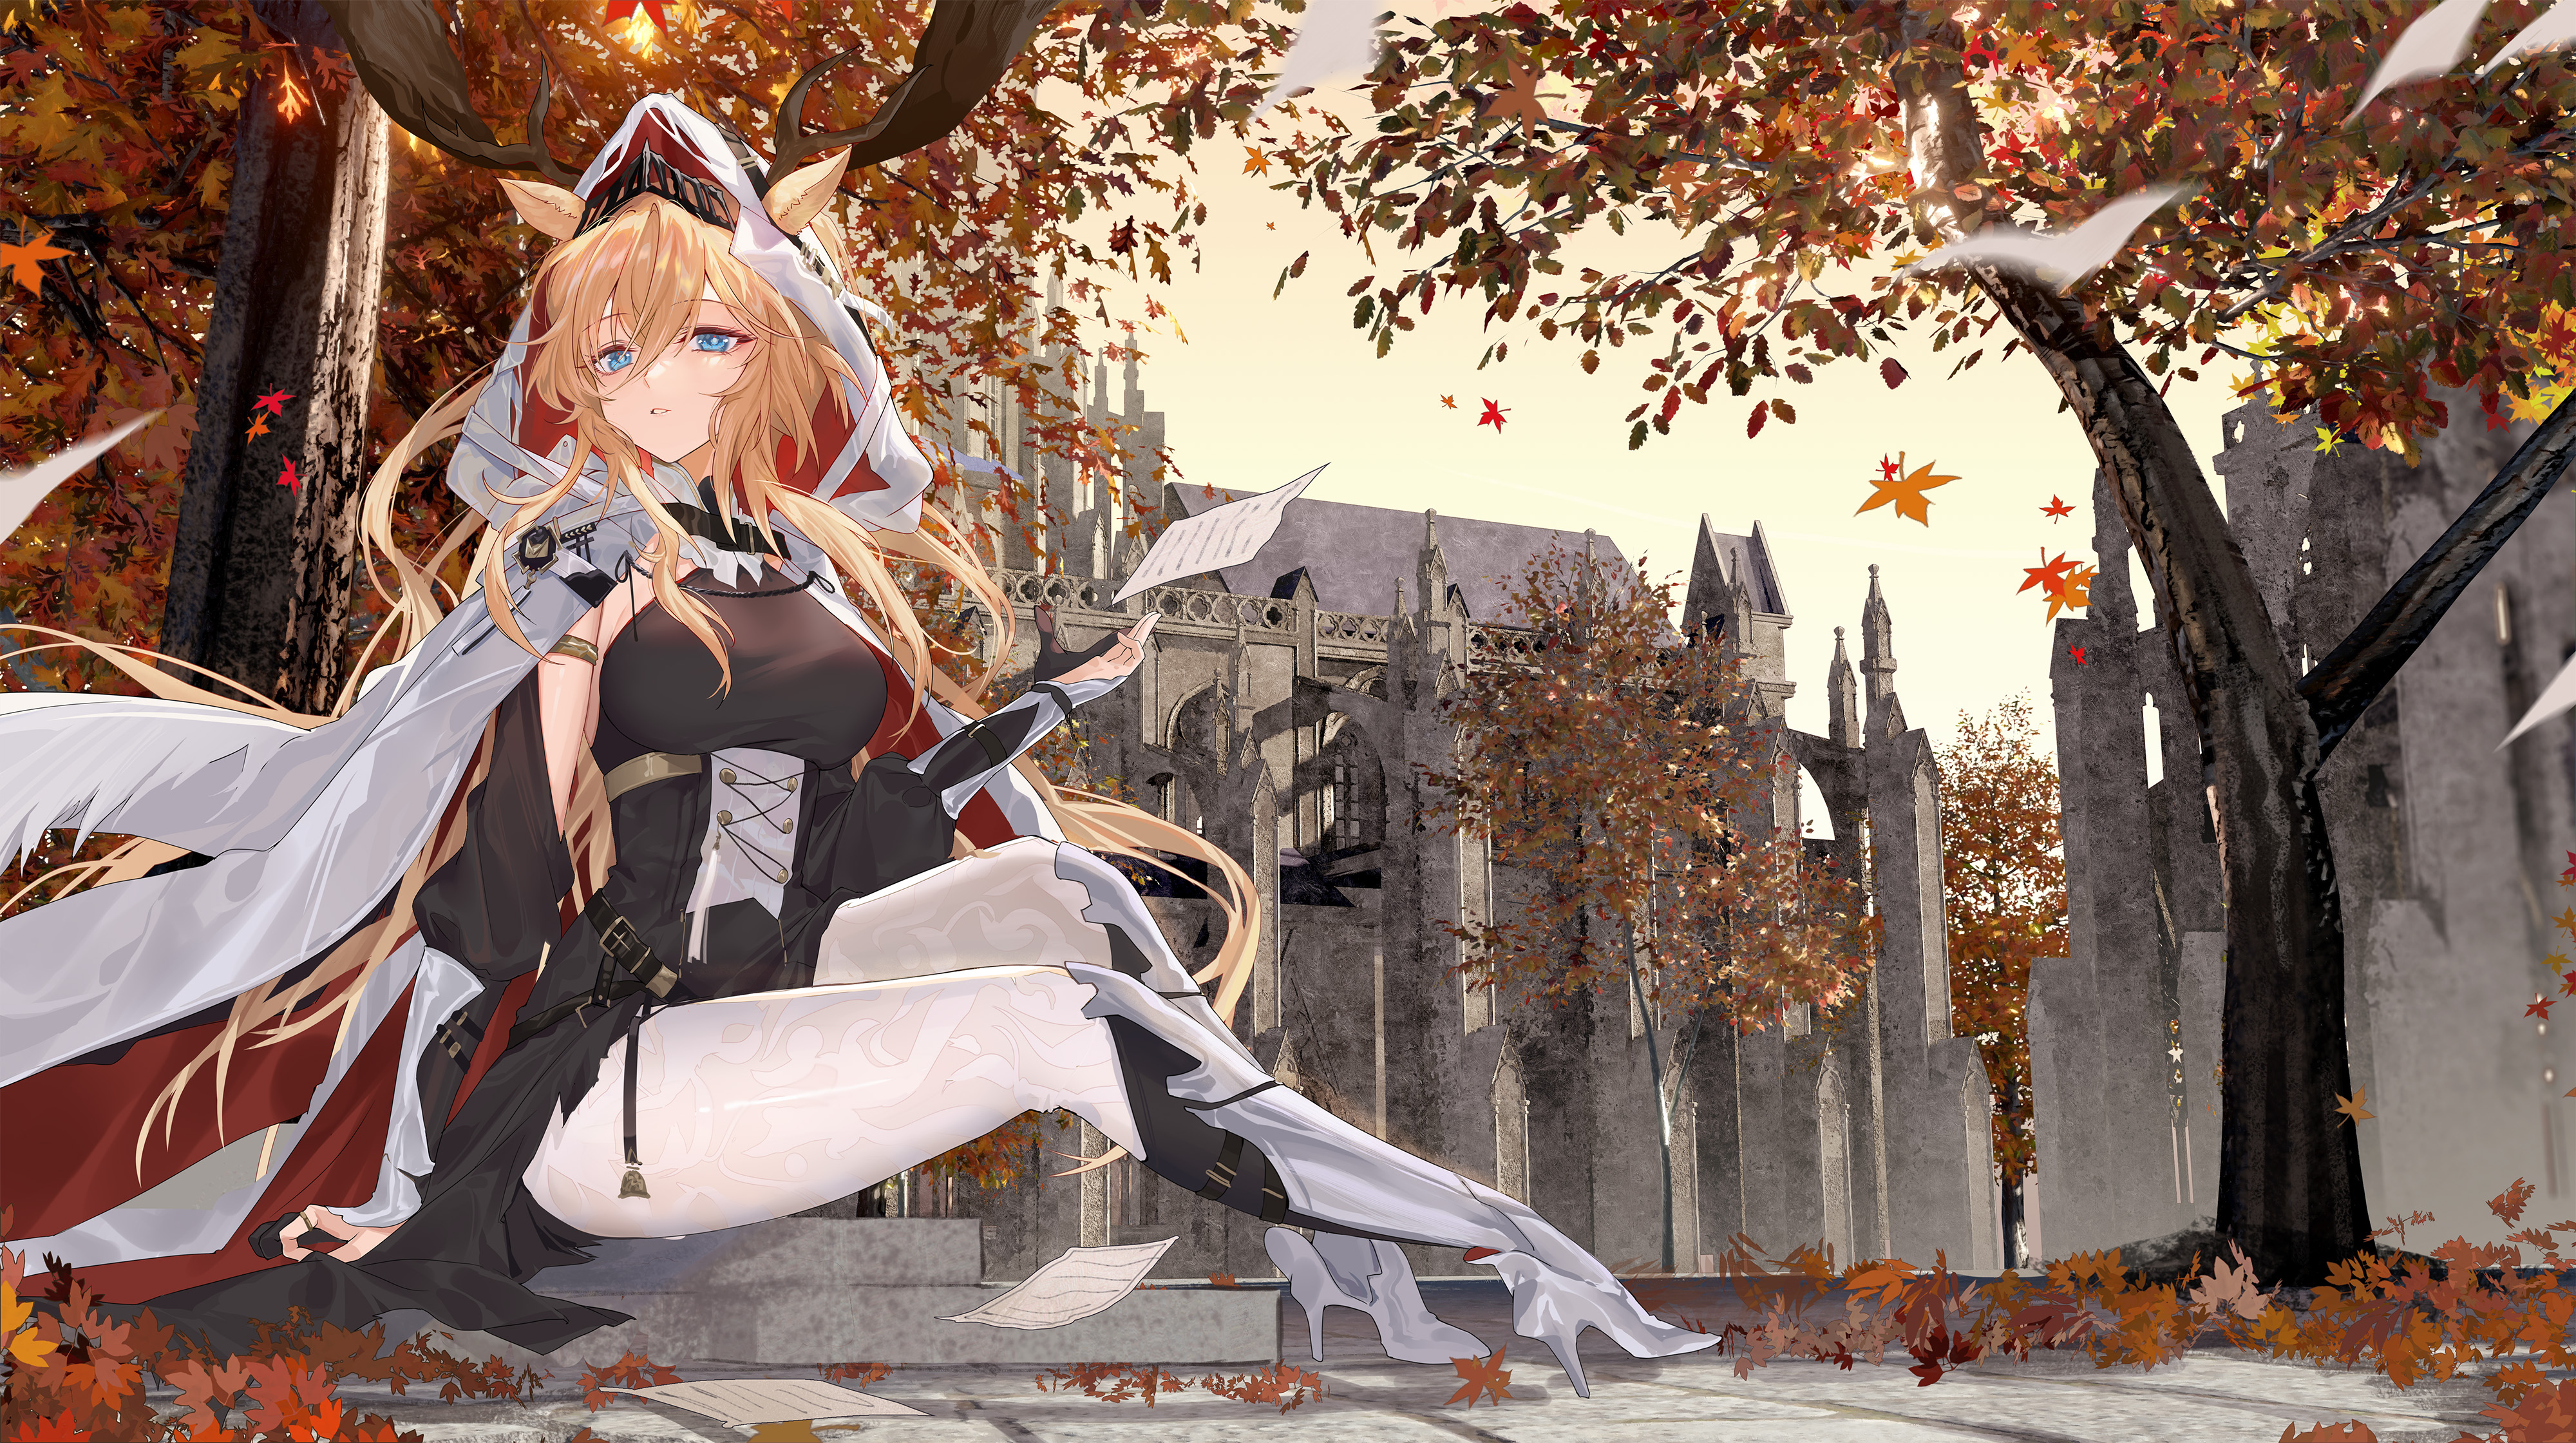 Anime Anime Girls The Candle Knight Viviana Arknights Arknights Long Hair Blonde Blue Eyes Sitting H 4000x2240